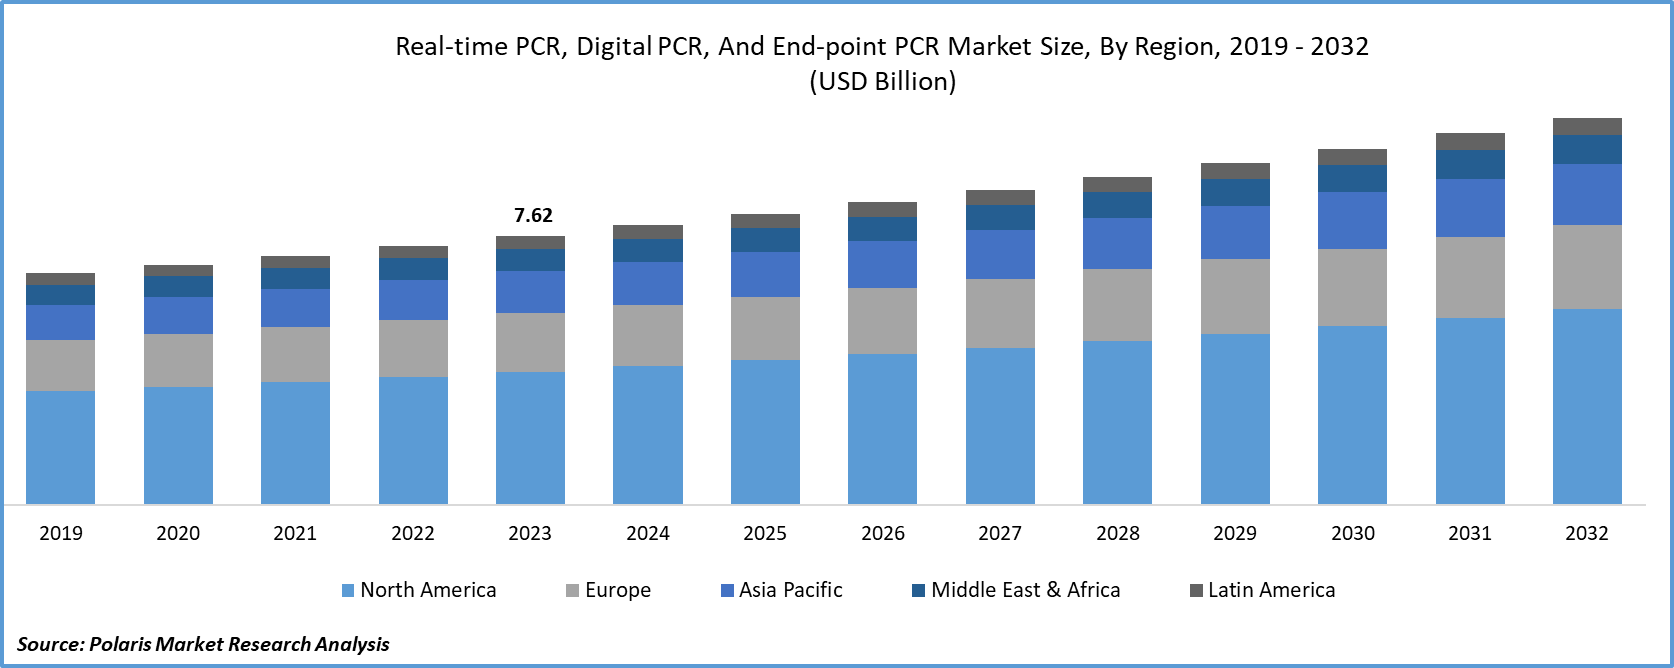 Real-time PCR, Digital PCR, and End-point PCR Market Size